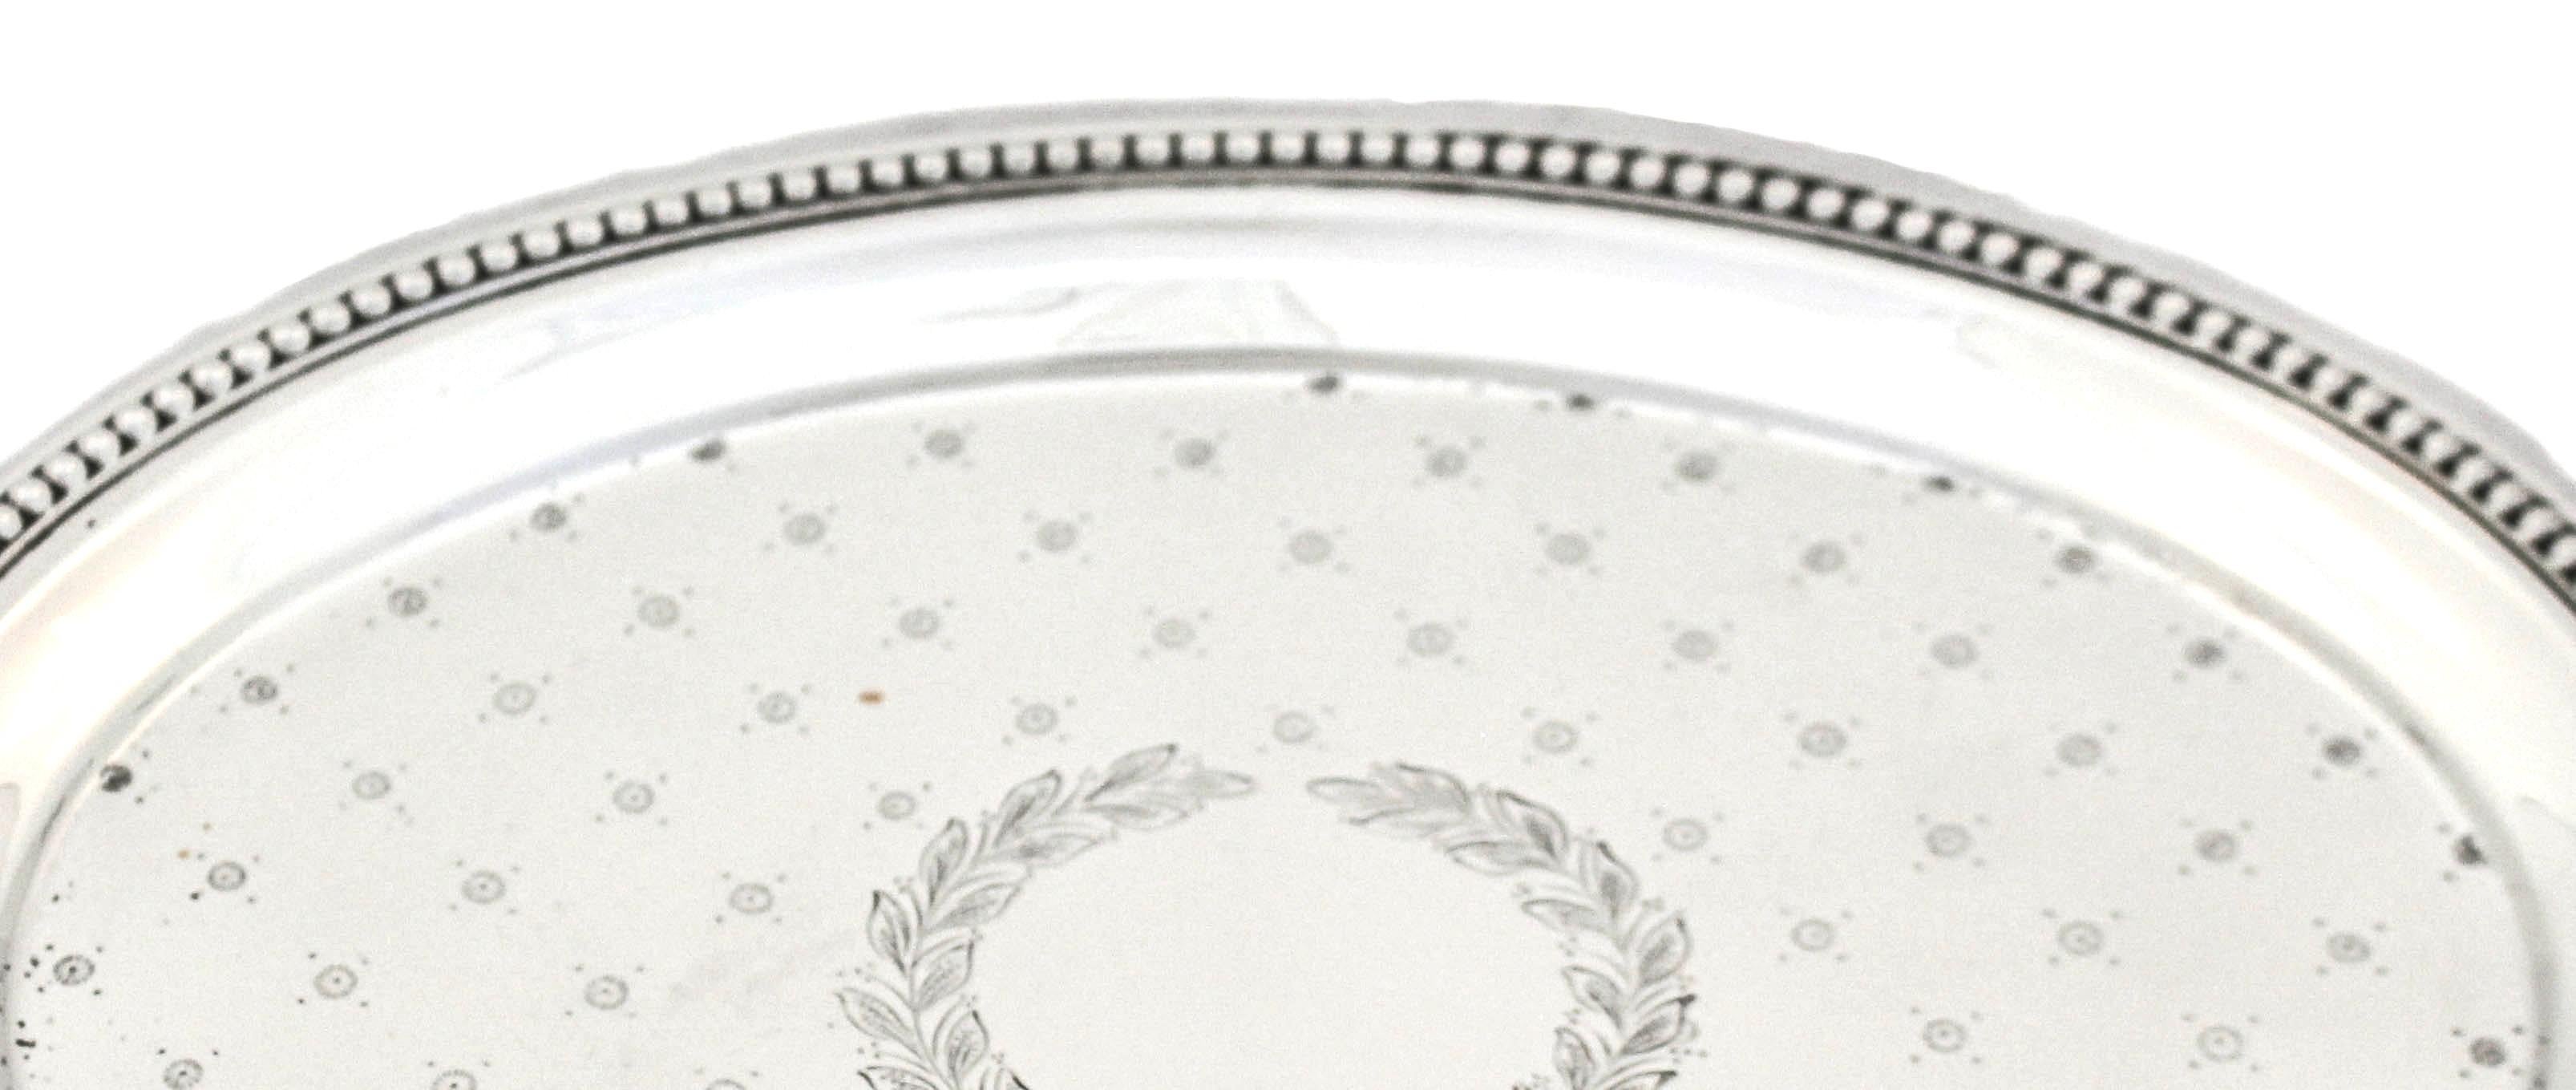 Being offered is a sterling silver salver by J. E. Caldwell of Philadelphia. 
This lovely antique piece is oval shaped and has a row of beads going around the edge.  It stands on four feet so it is raised off the surface.  In the center a wreath